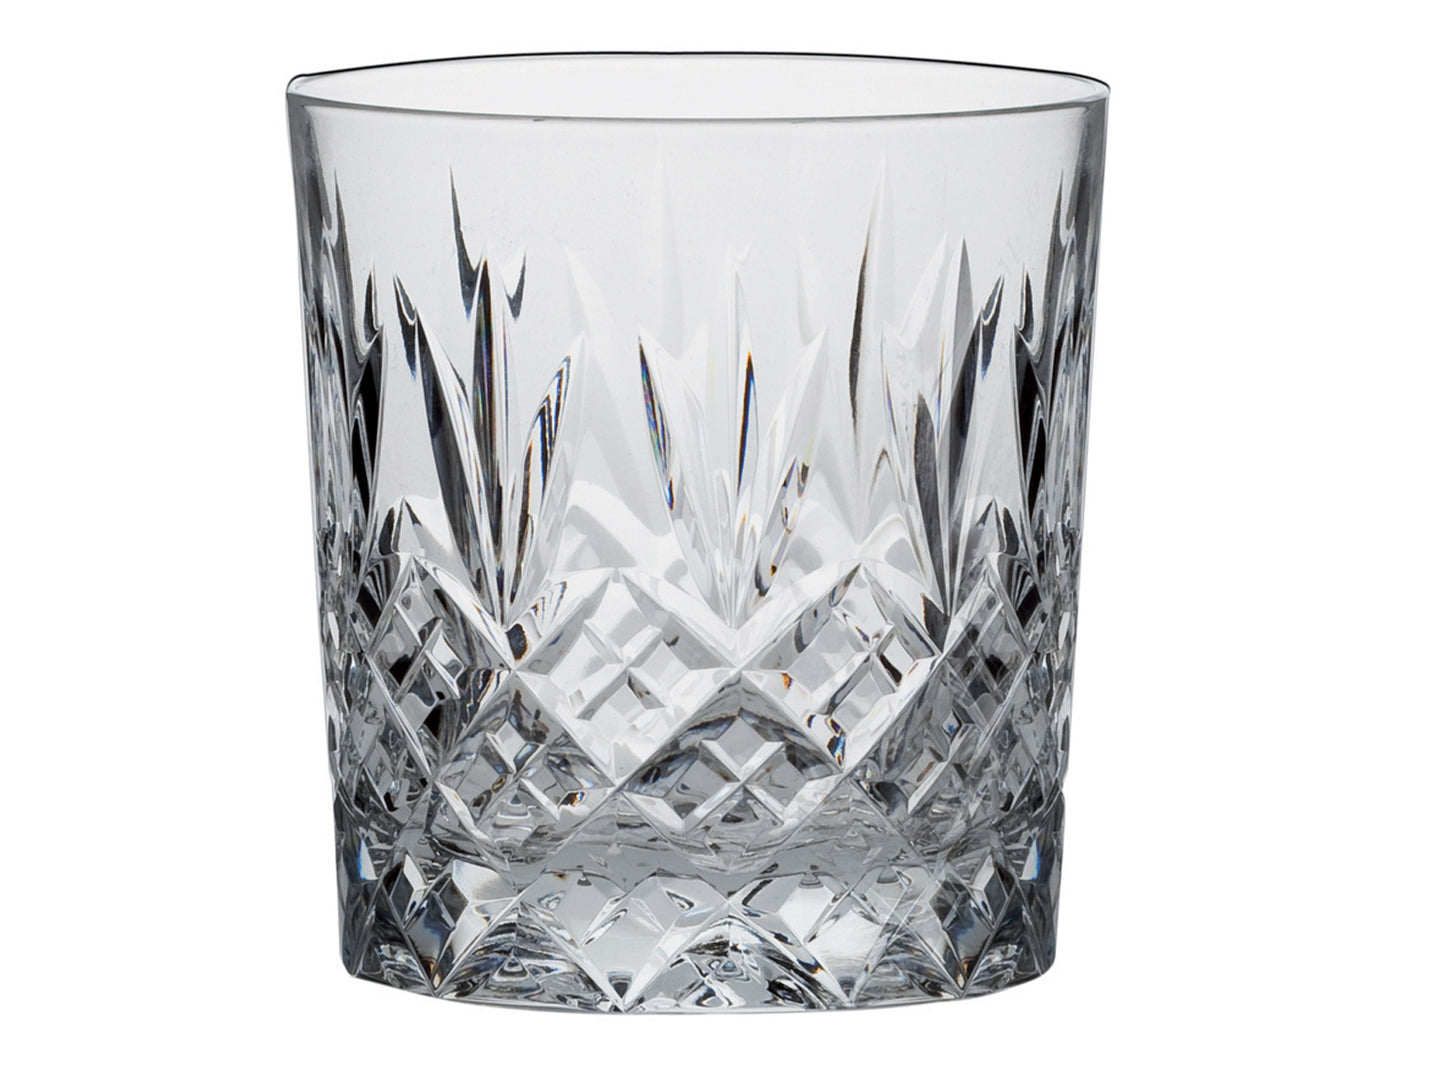 Royal Scot Crystal Edinburgh Tumblers - Large / Single is a hand-cut whiskey tumbler that is patterned with the signature Edinburgh design, along with its classic straight-shape and weighted bottom to avoid spillages.